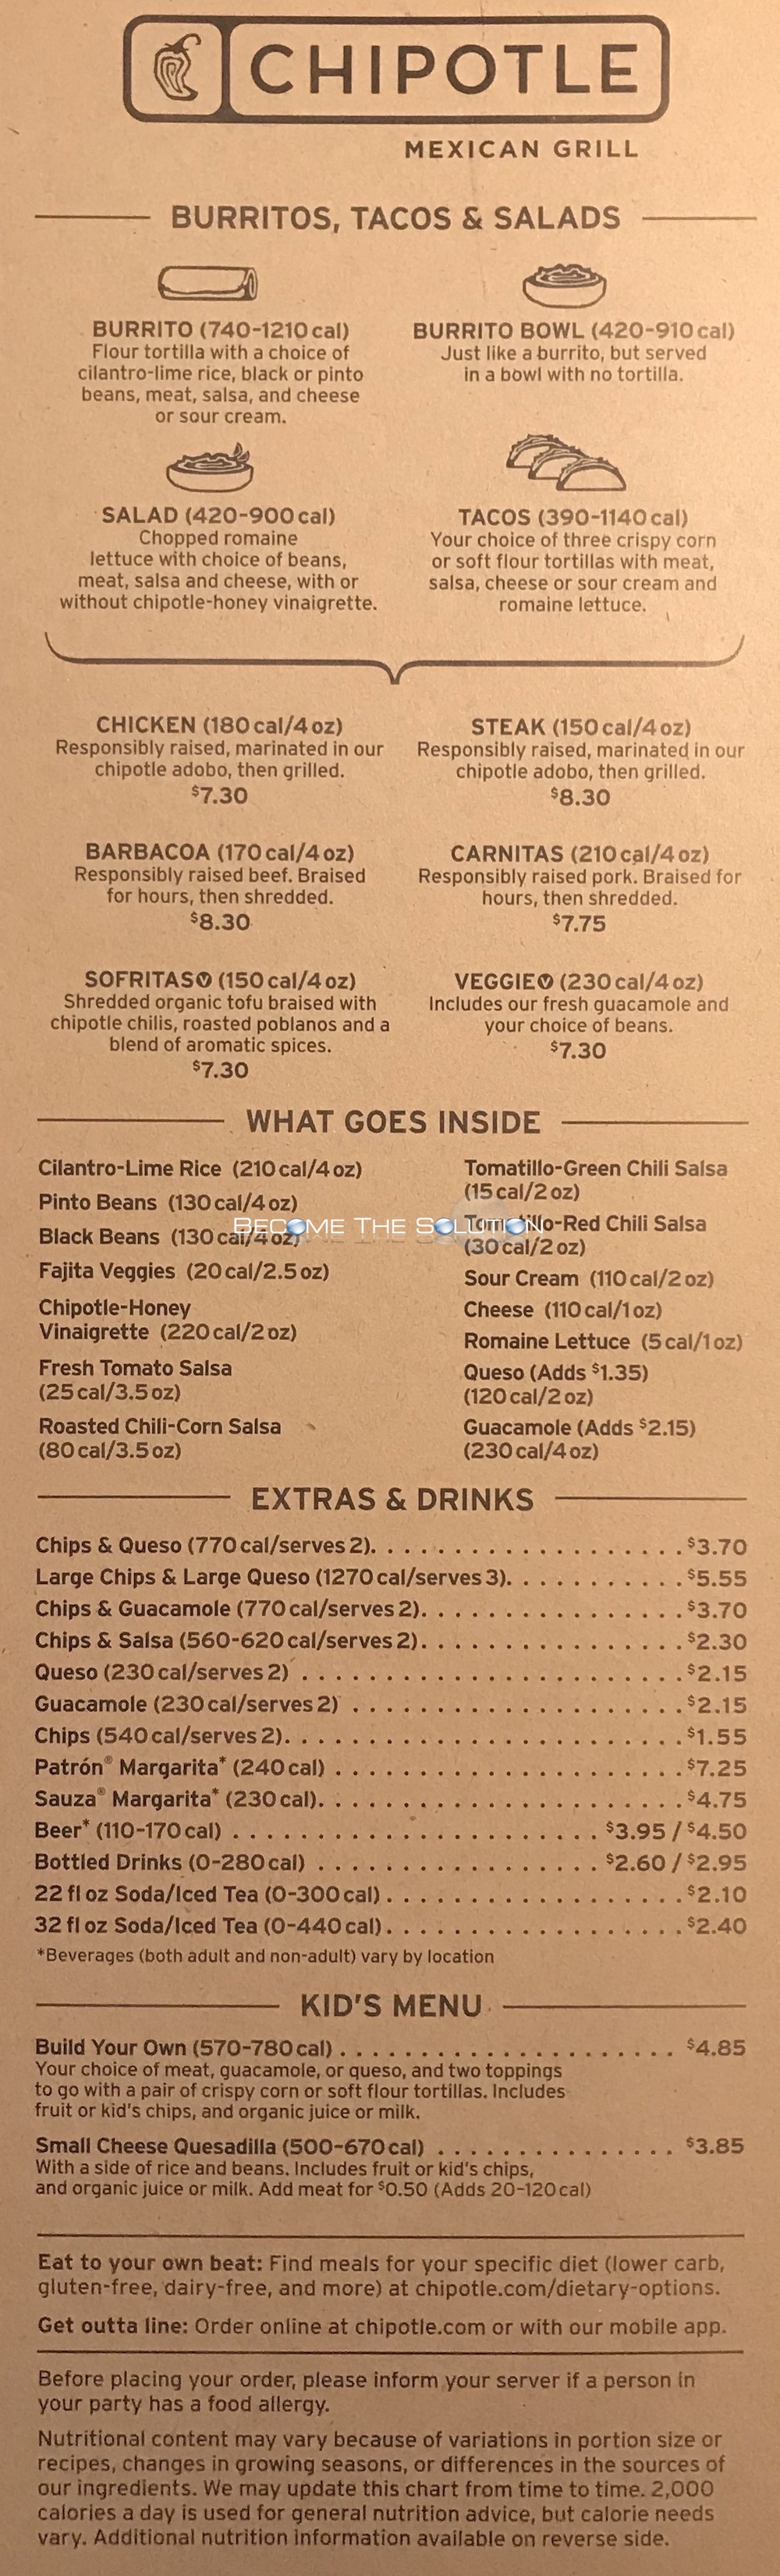 Chipotle Menu Chicago Michigan Ave (Scanned Menu With Prices)